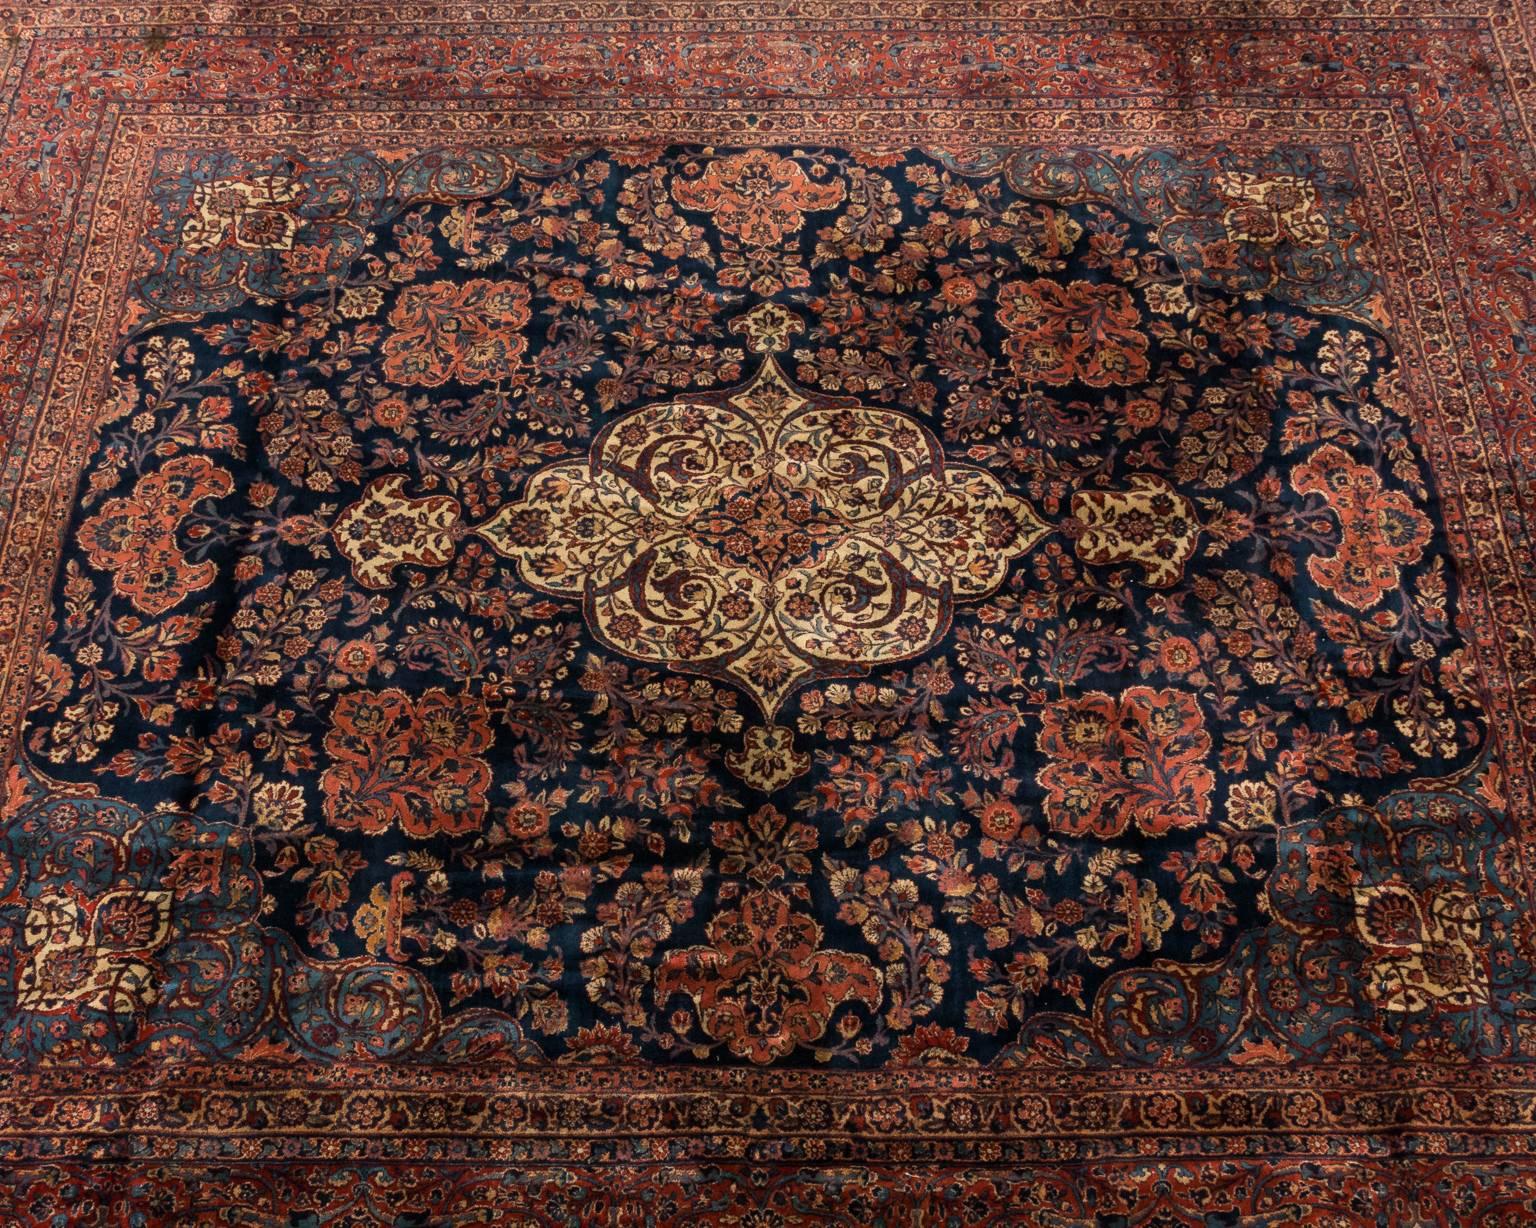 Antique Caucasian rug with a dramatic central pendant flanked by various scrolled medallions and sweeping arabesque caves, circa 19th century.
 